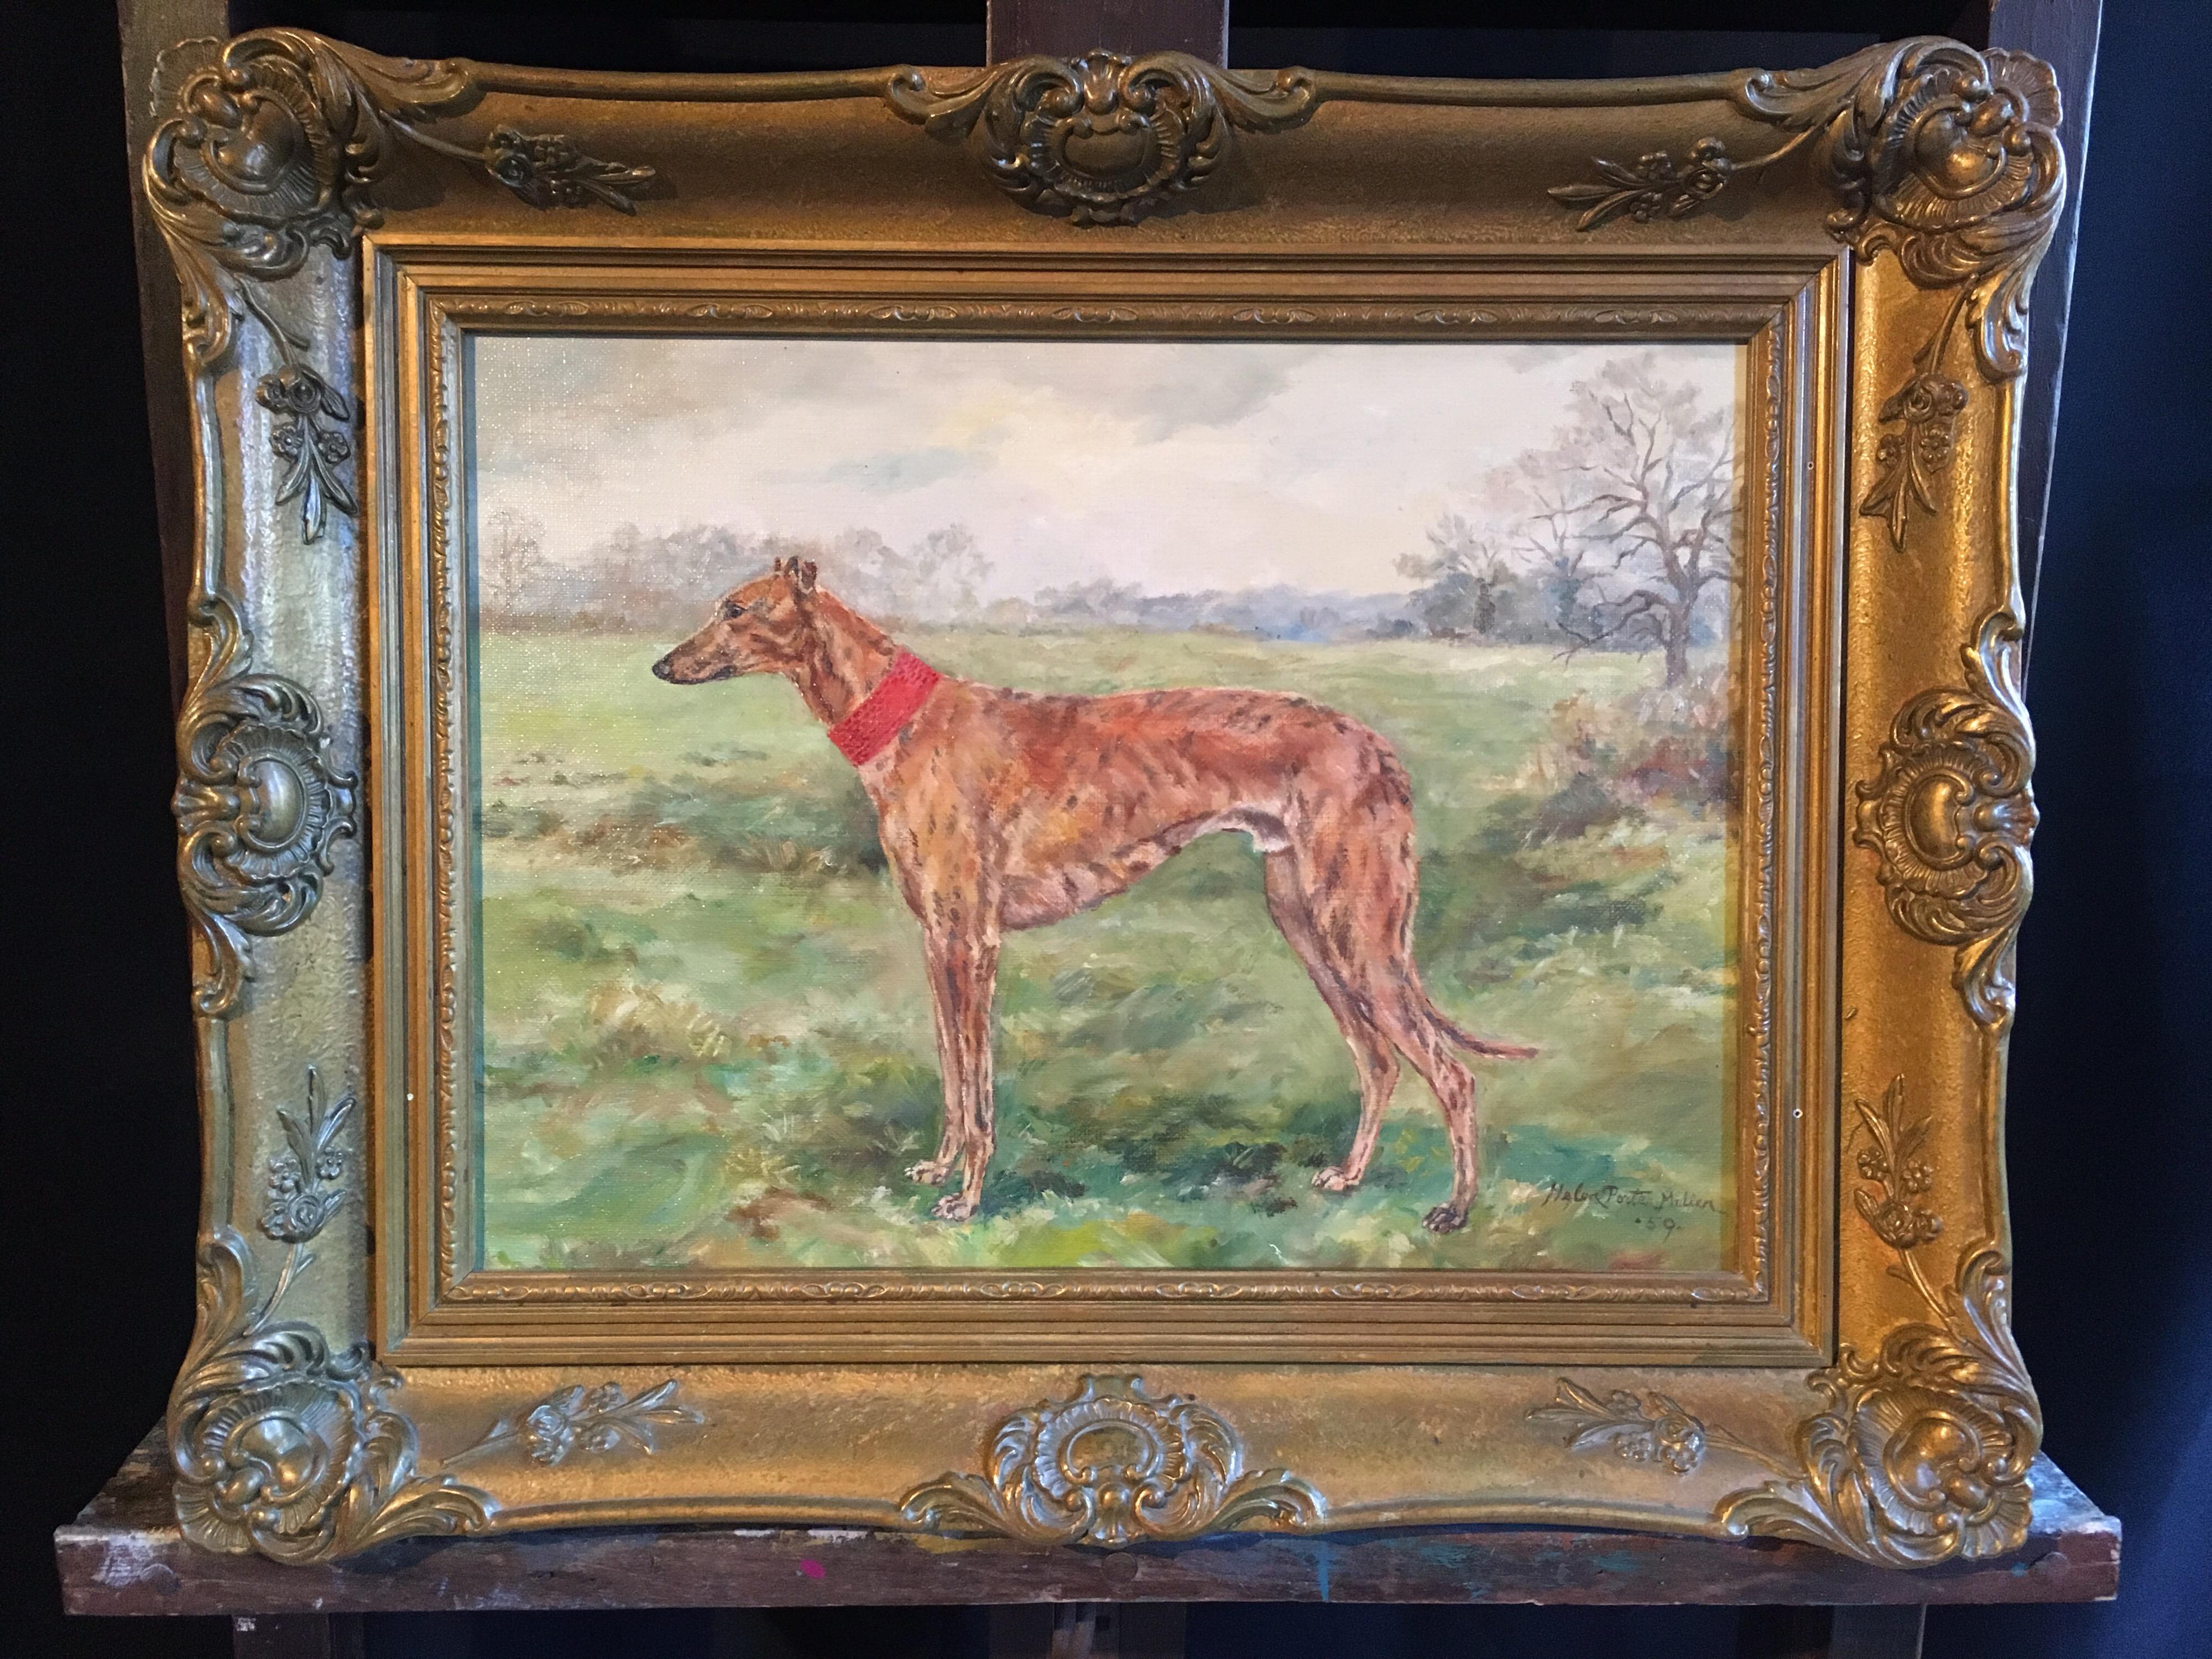 Whippet Dog Portrait 'Stoneden Hiawatha' Fine Impressionist Oil Painting, Signed
By British artist 'Helen Porter Millen' Mid 20th Century
Signed by the artist on the lower right hand corner, 
Titled verso
Oil painting on canvas, framed
Framed size: